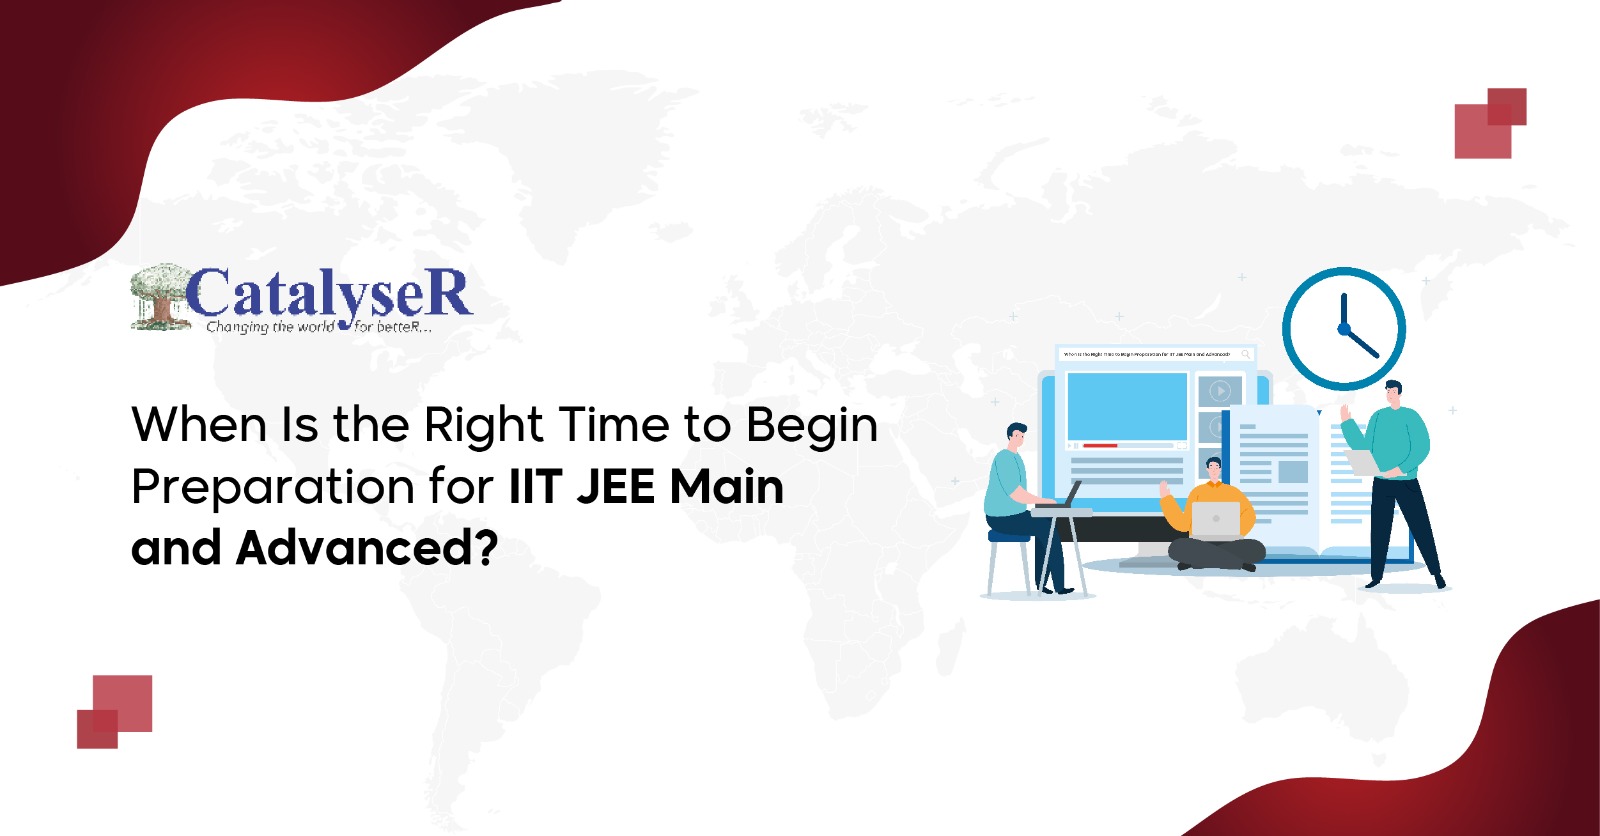 When Is the Right Time to Begin Preparation for IIT JEE Main and Advanced?